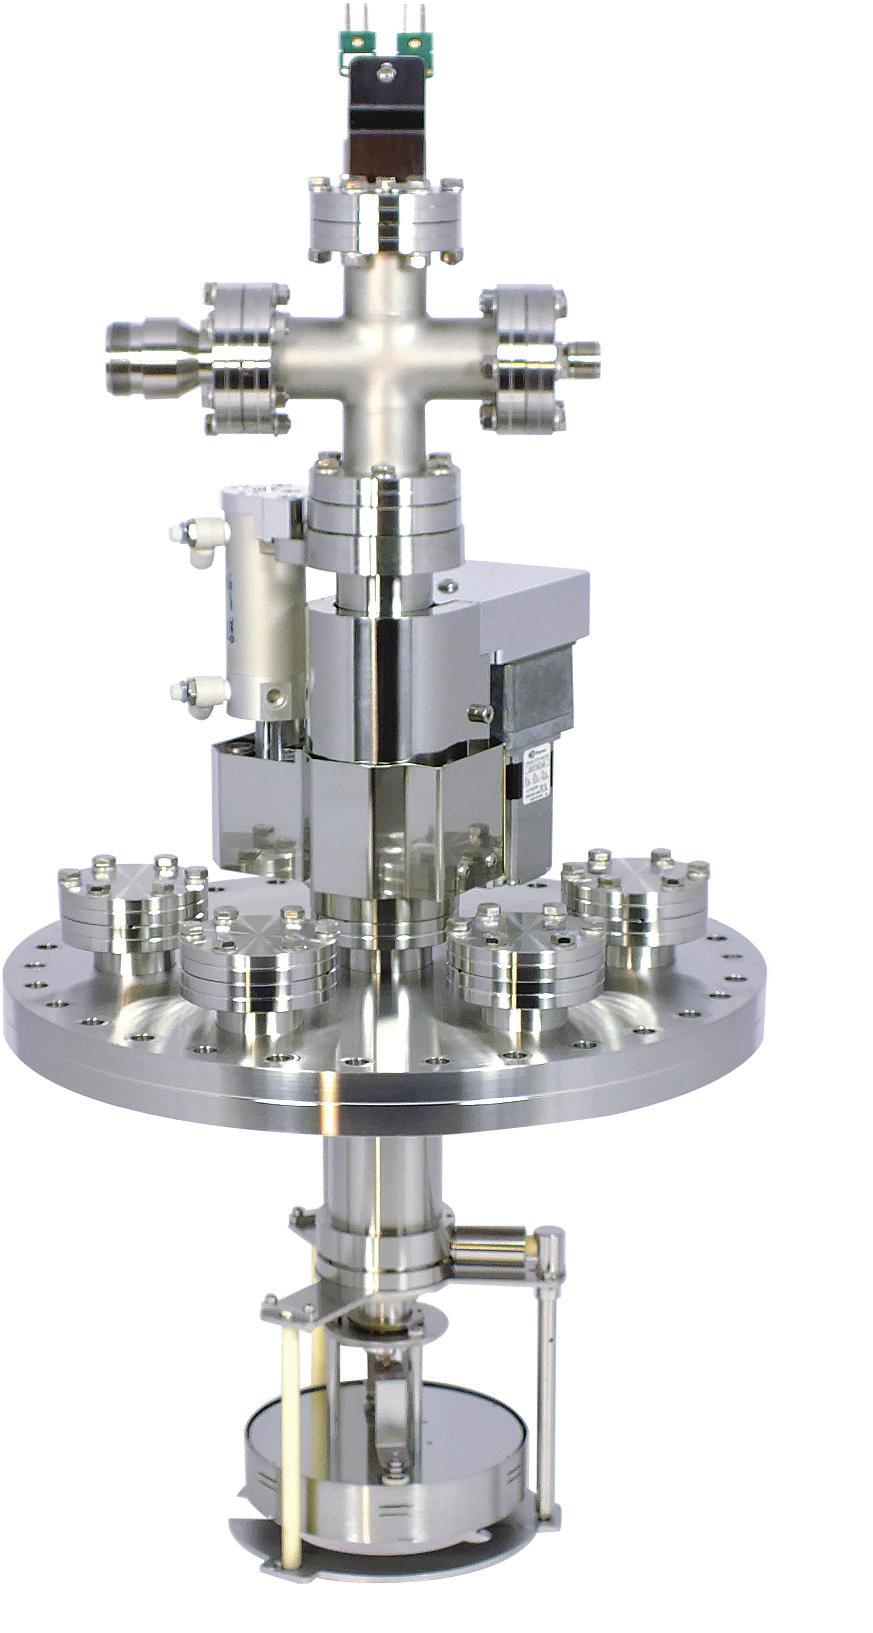 EpiCentre In-line Deposition Stages Substrate parallel to plane of mounting flange EC-I Series Typical ECI stage Single or twin, height adjustable C-type or K-type thermocouples.